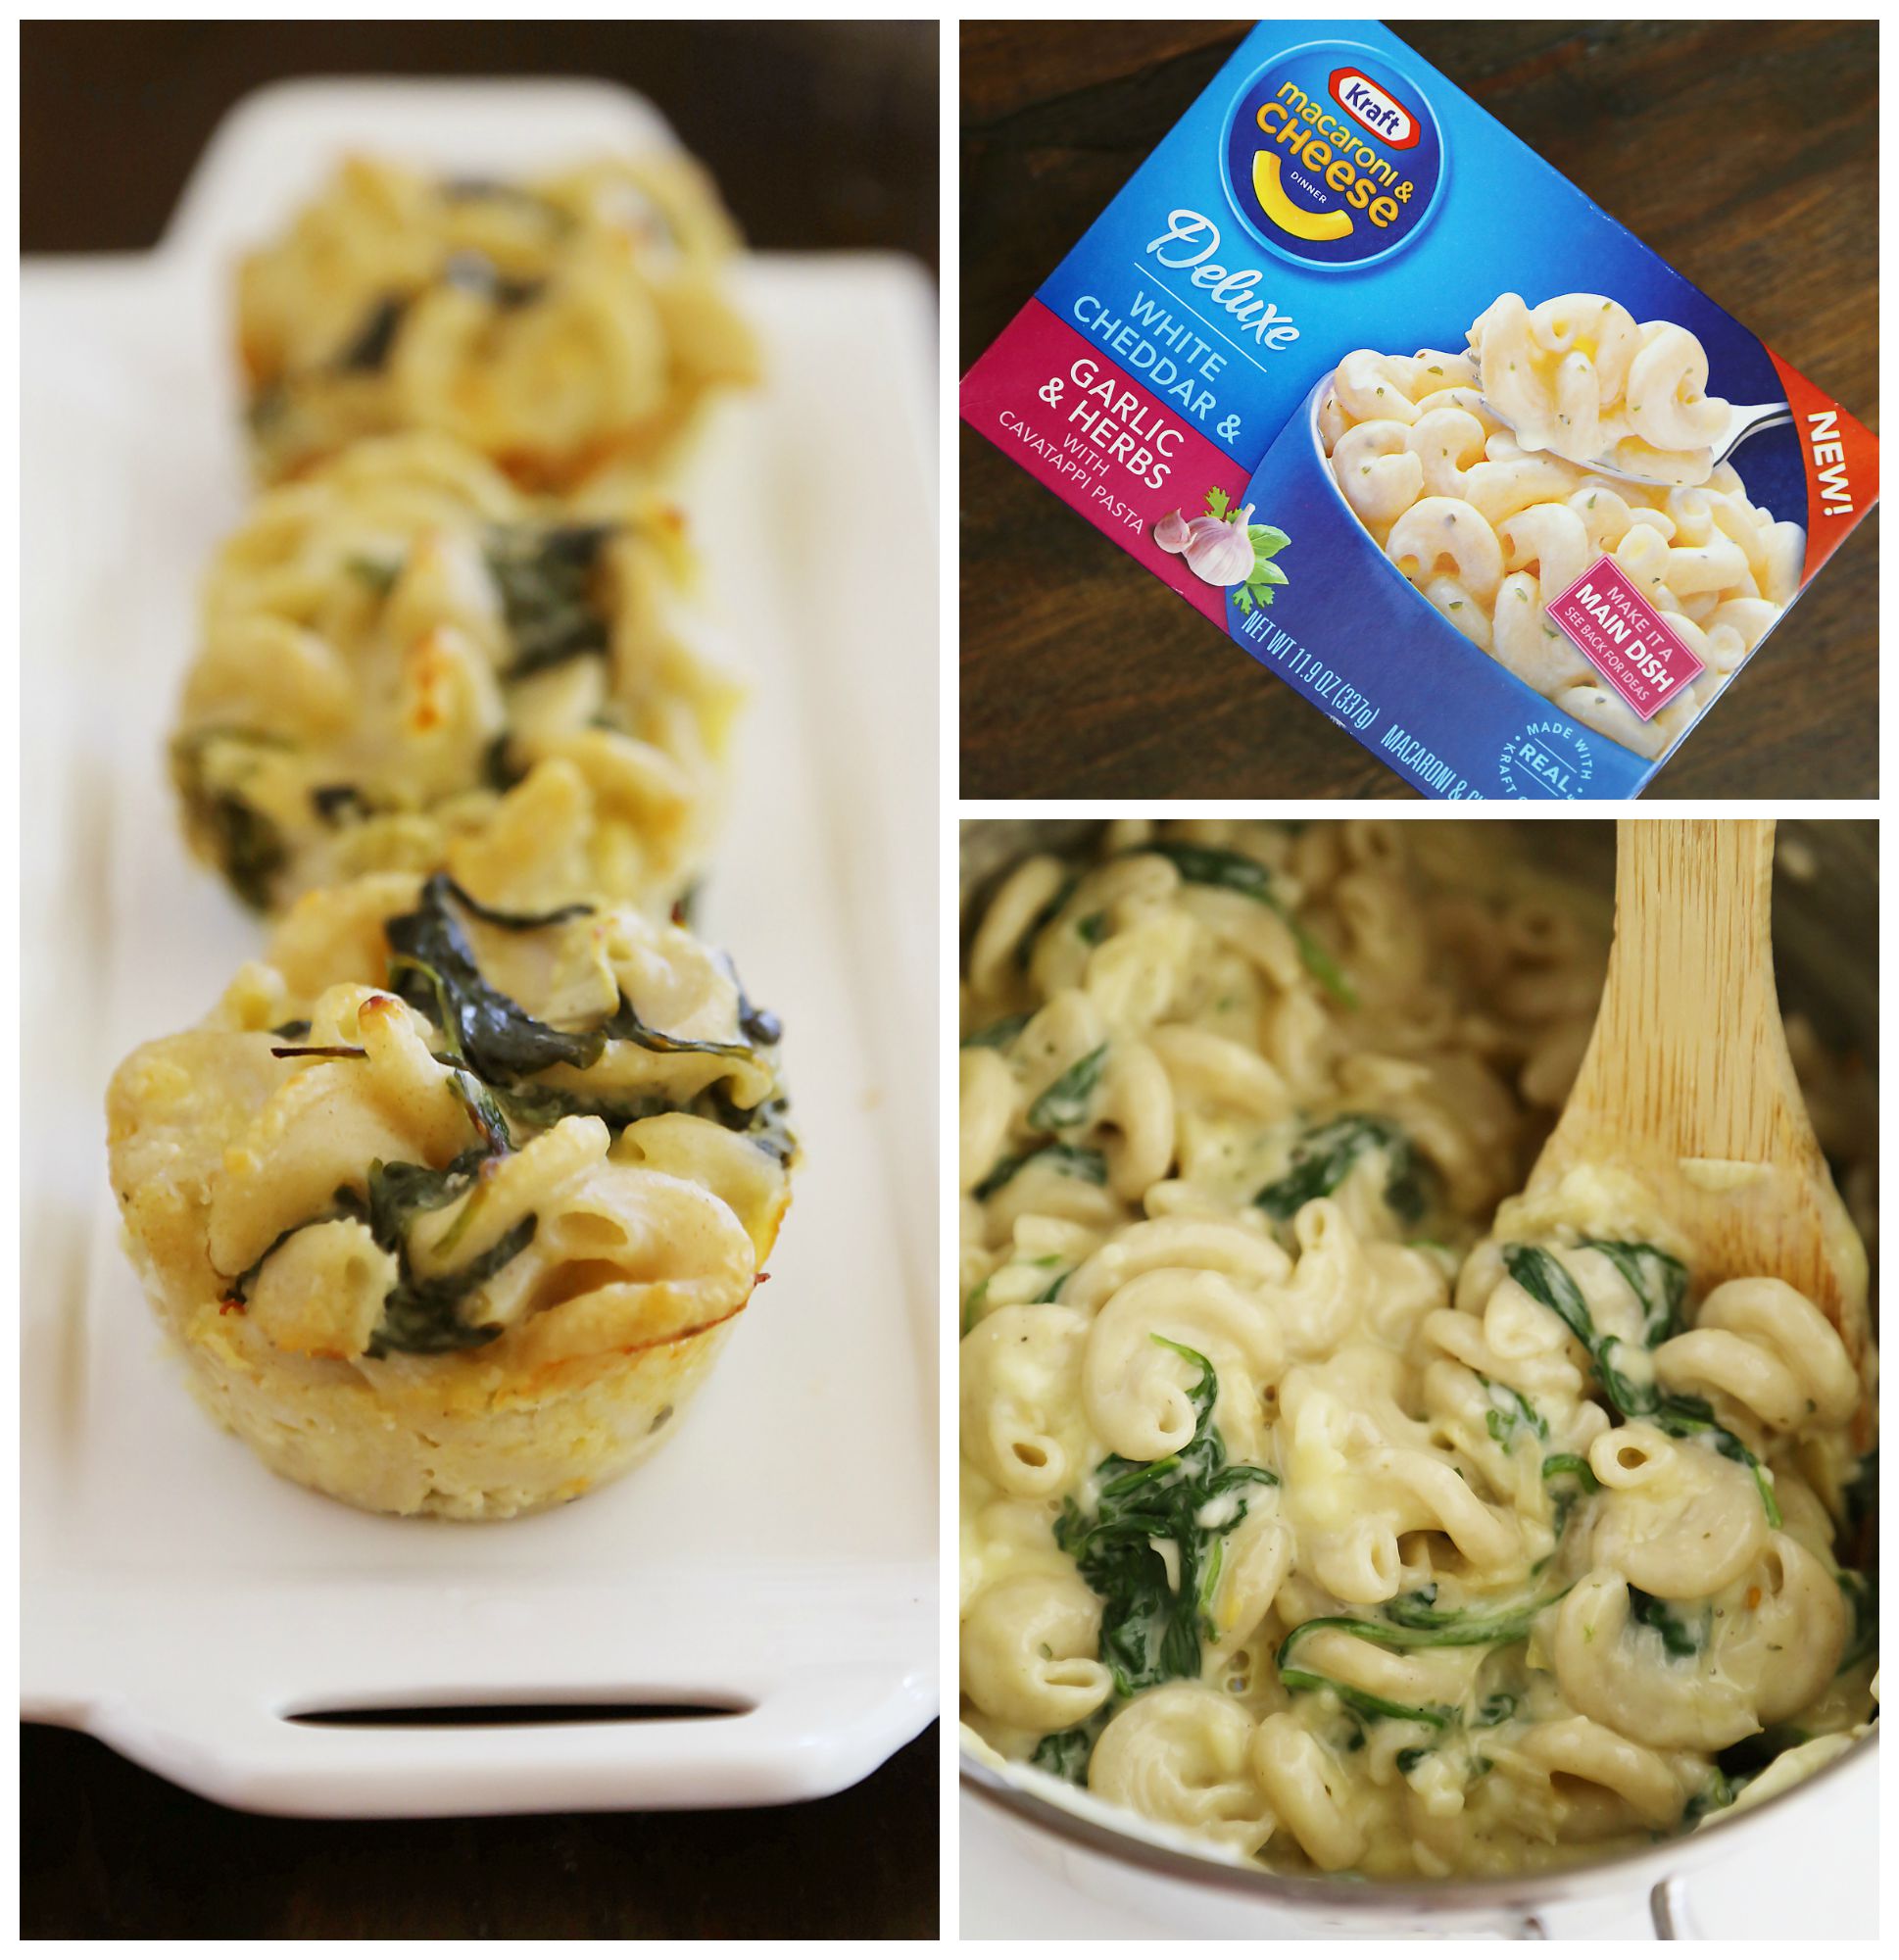 Spinach and Artichoke Macaroni and Cheese Bites – Enjoy the flavor of your favorite delicious dip in a creamy, cheesy mini mac and cheese. So good! thecomfortofcooking.com